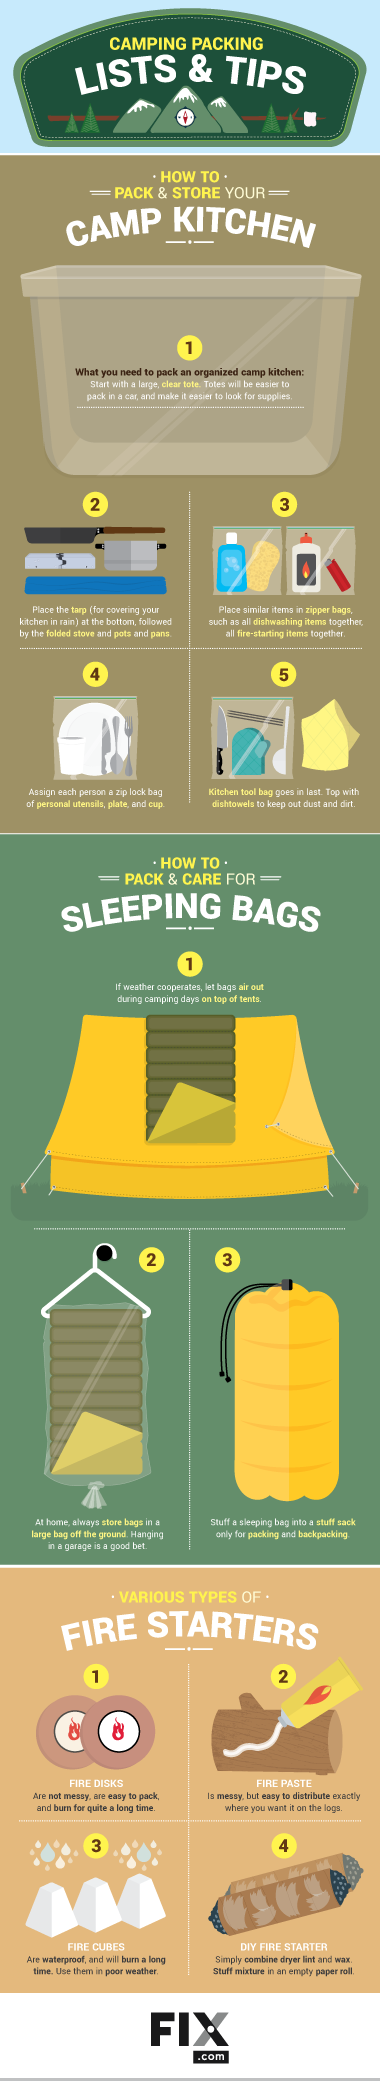 Camping Lists and Tips For The Family Trip | Fix.com